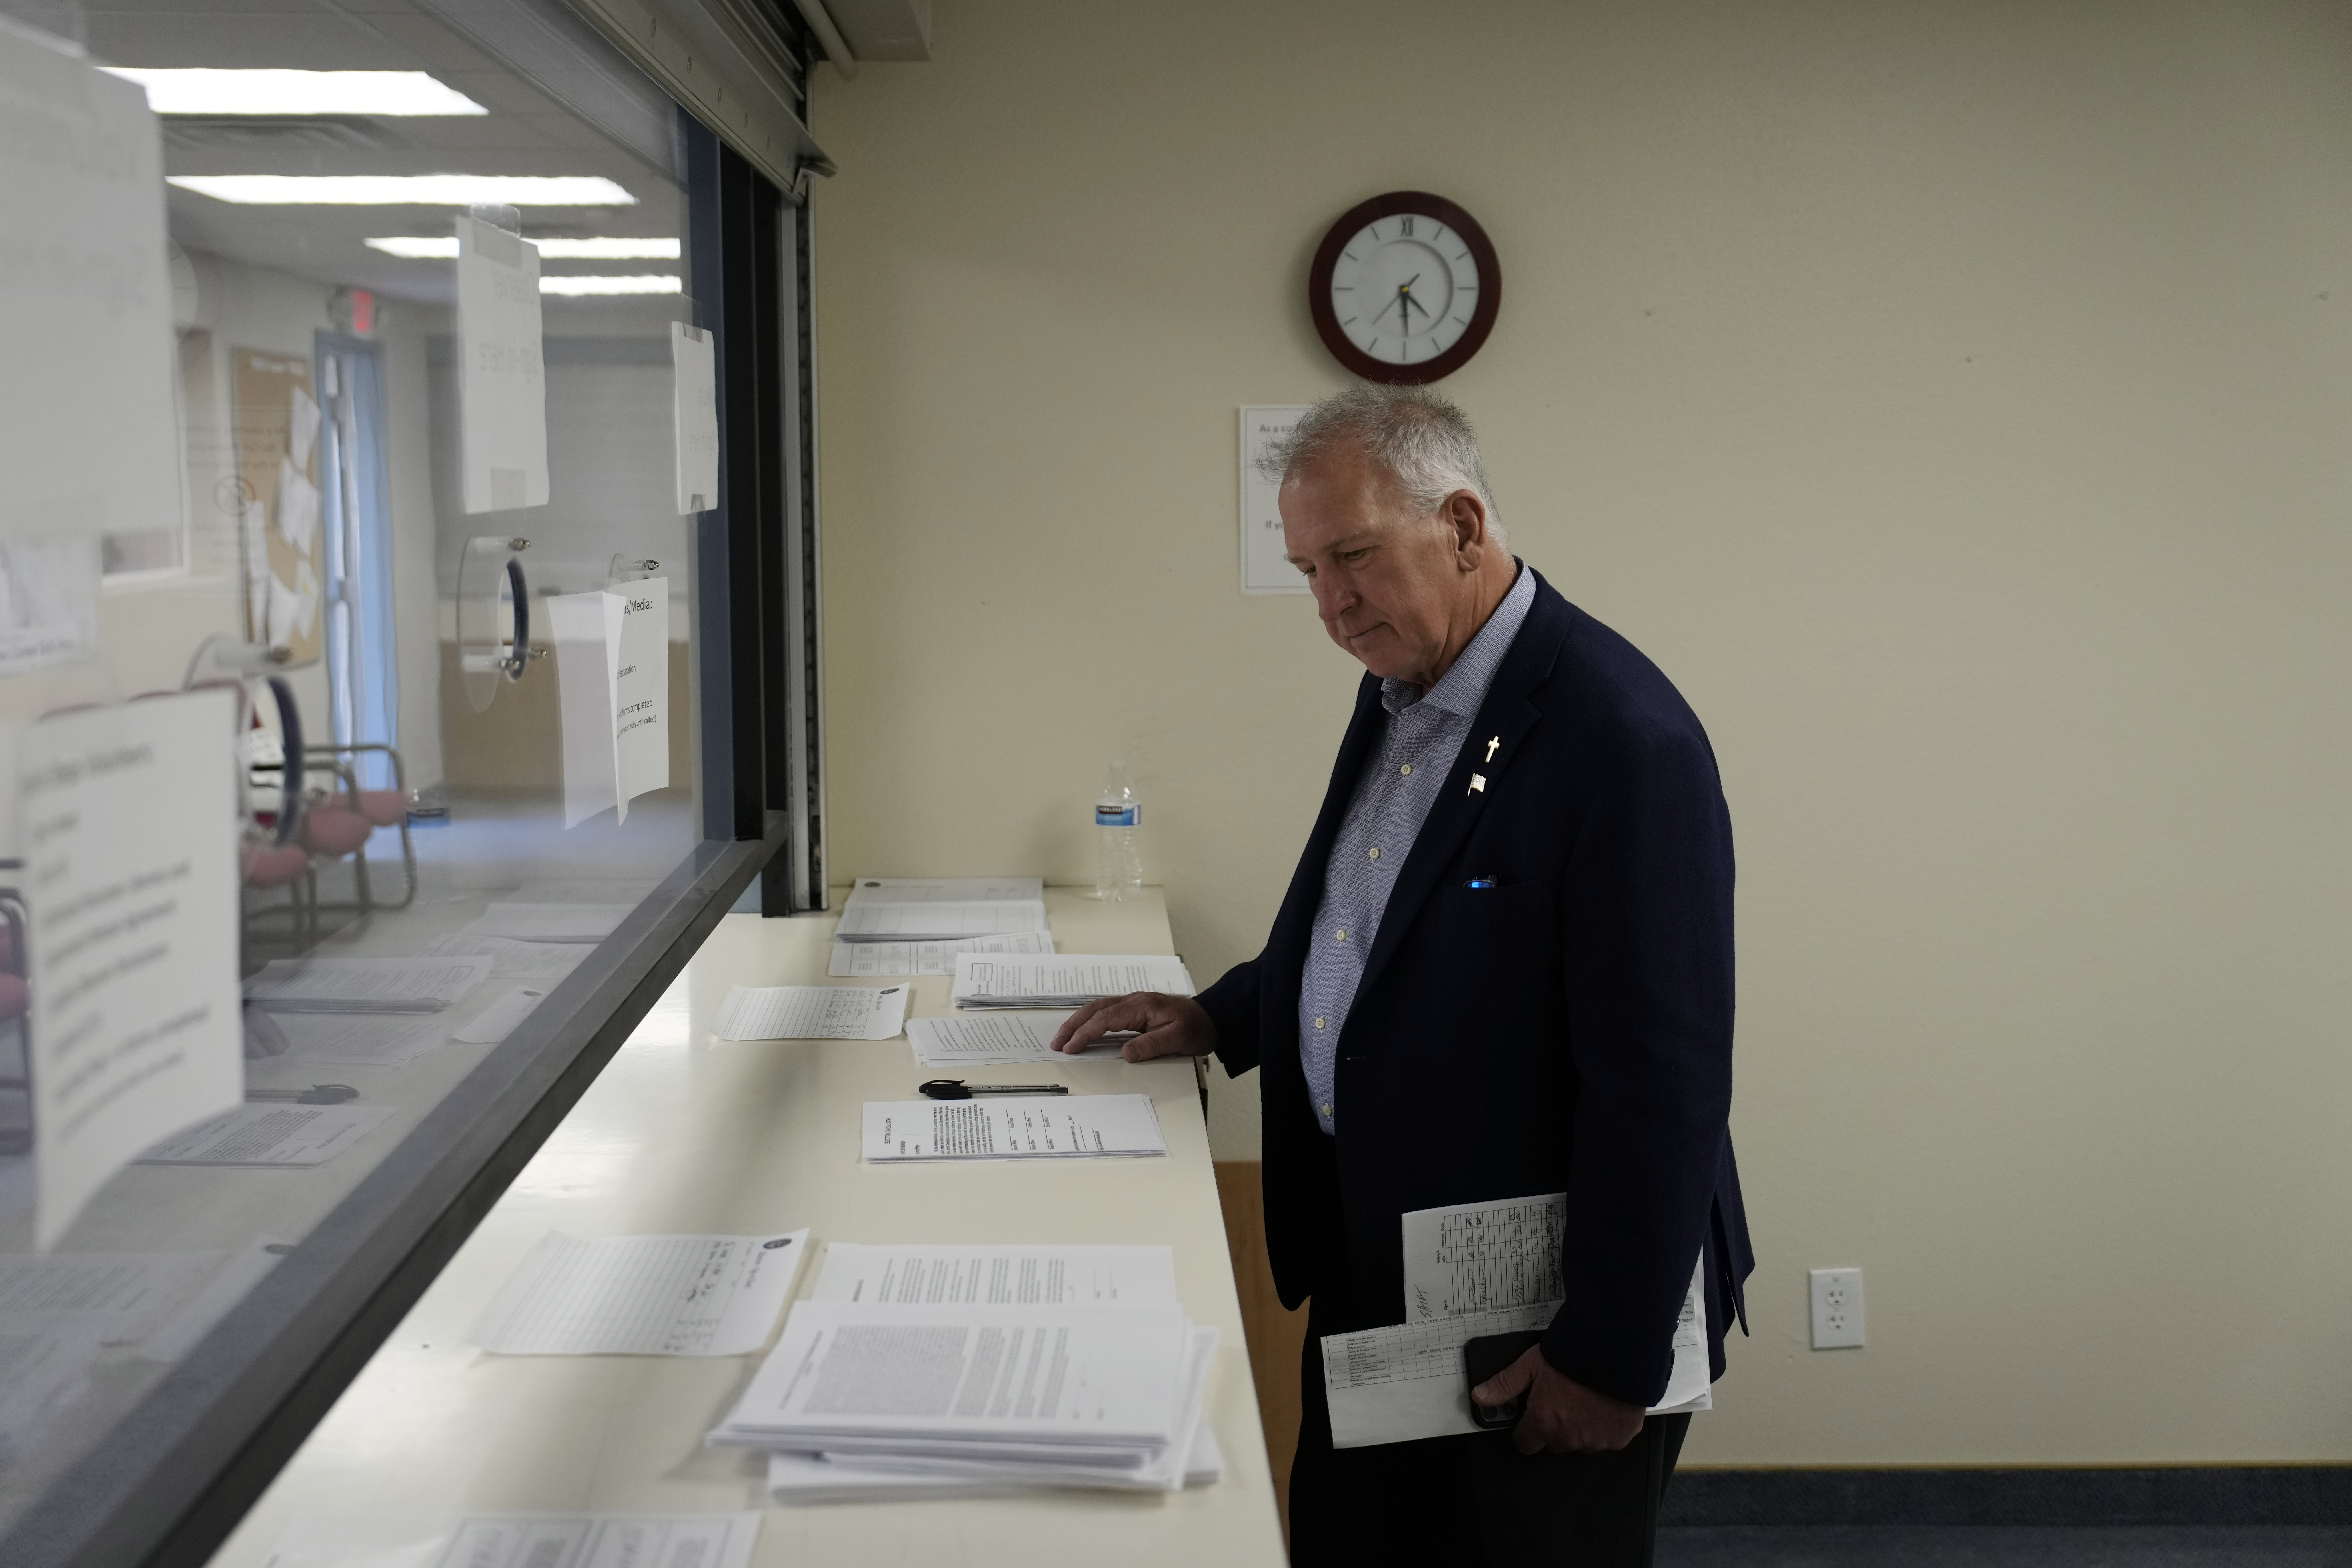 FILE - Interim Nye County Clerk Mark Kampf works in an office where early votes are being counted, Oct. 26, 2022, in Pahrump, Nev. Kampf, top elections official in the rural Nevada county roiled by false claims of widespread election fraud that led to a partial hand-count in the 2022 midterms, is resigning, a county spokesperson confirmed Thursday, Feb. 29, 2024. (AP Photo/John Locher, File)